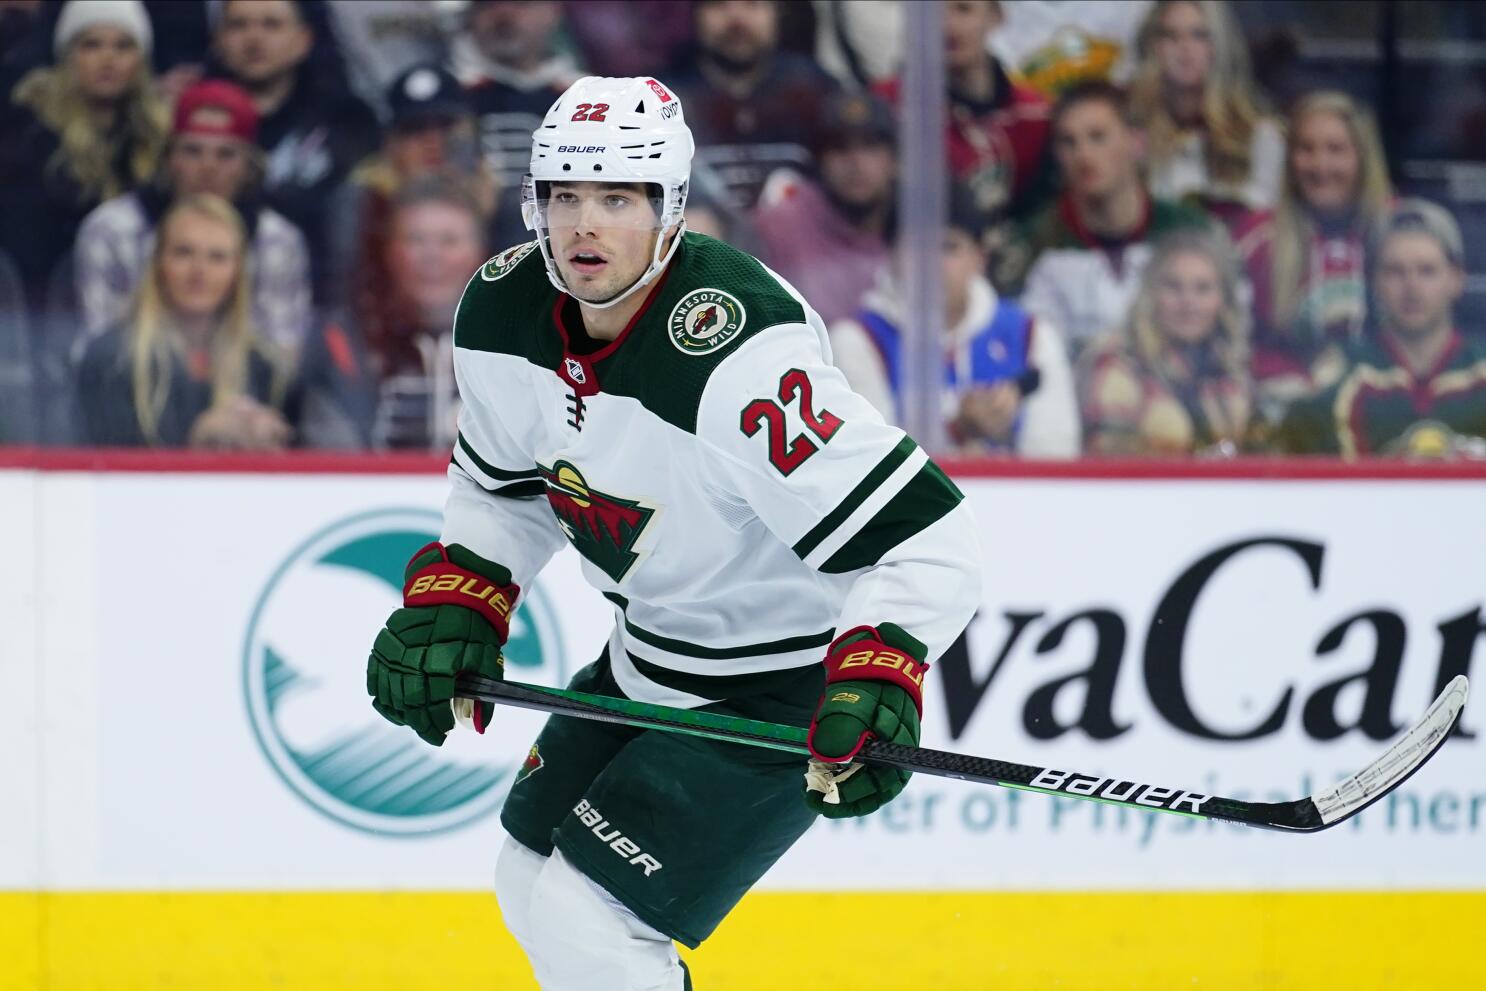 Minnesota Wild: Analytics point to a career year for Kevin Fiala